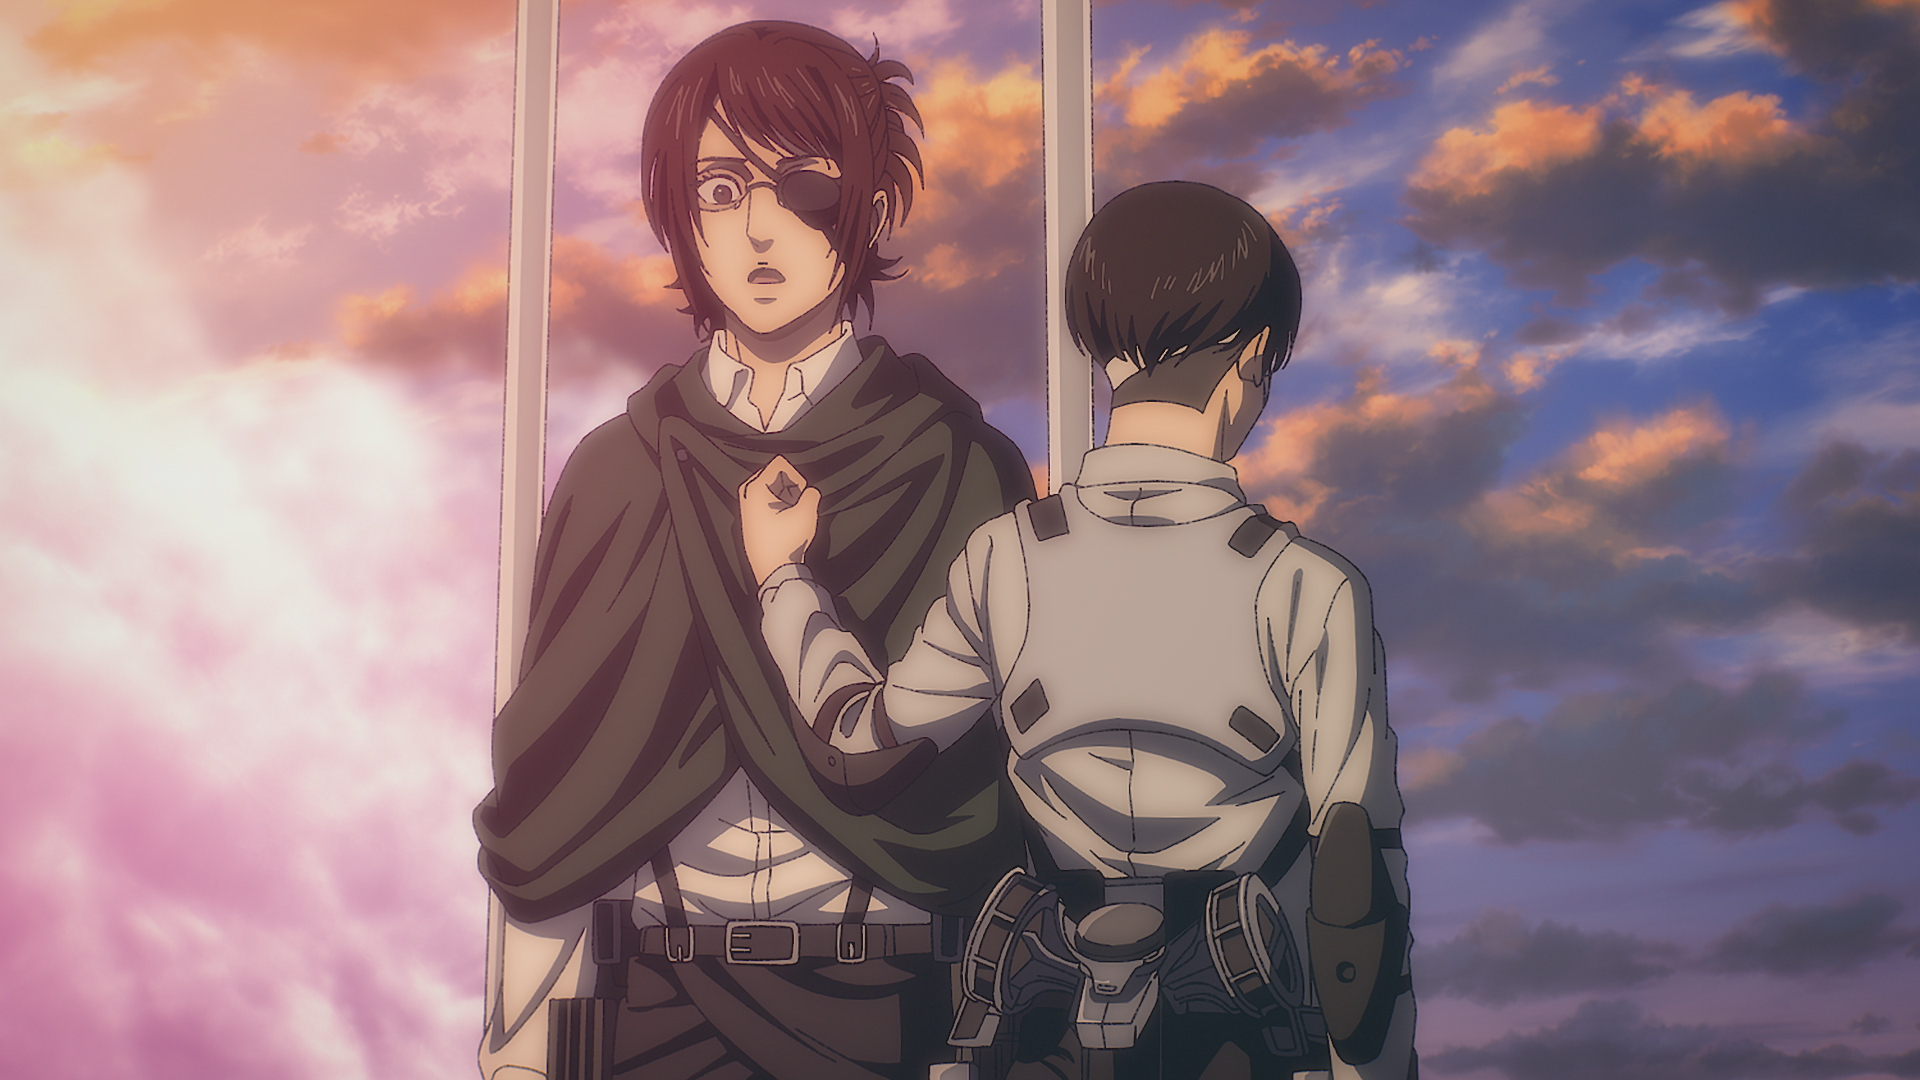 Hange Zoë from Attack on Titan stands looking upset while another character comforts them